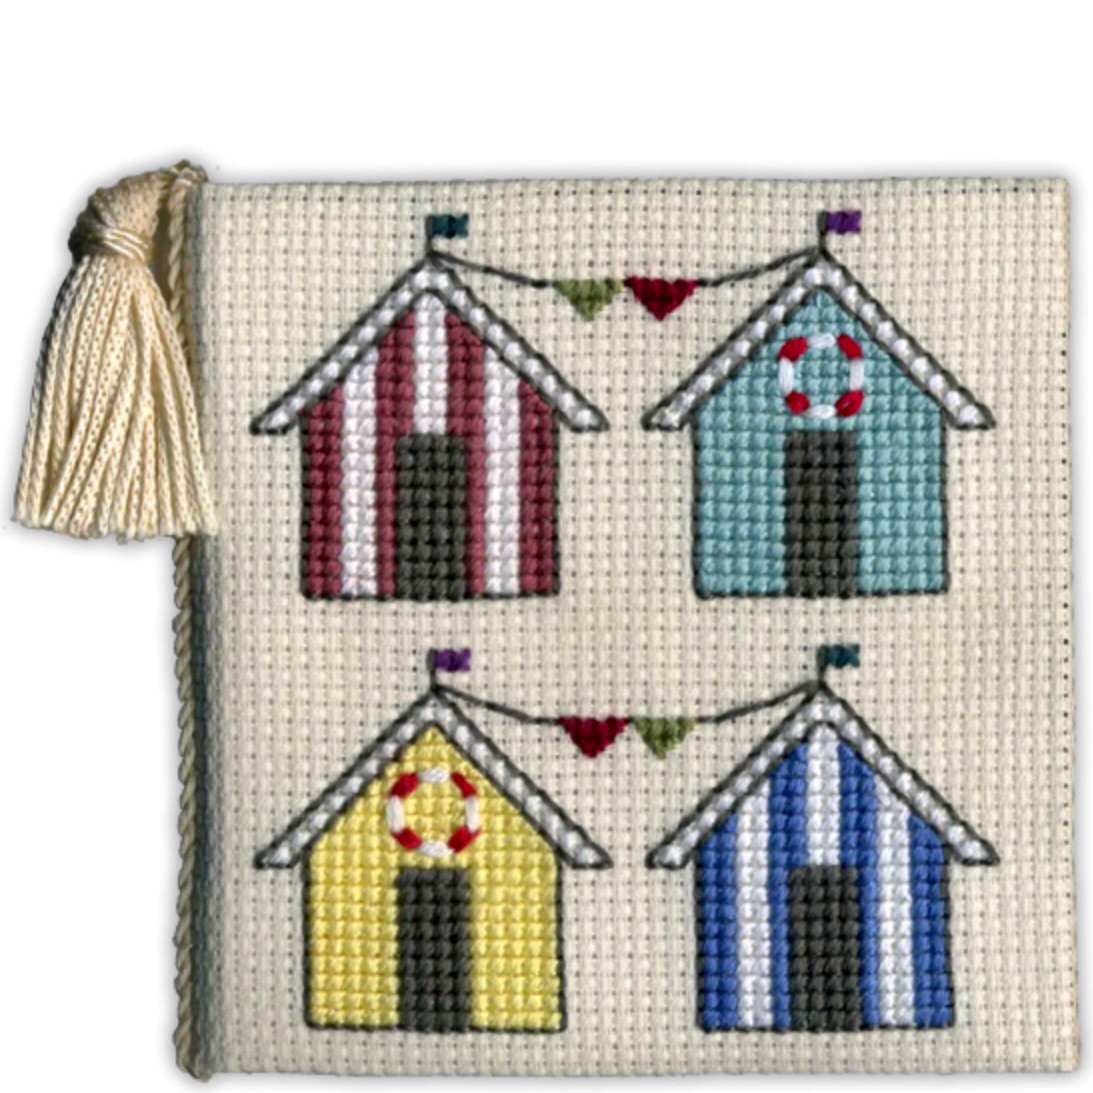 Needle Case Beach Huts Cross Stitch Kit by Textile Heritage.